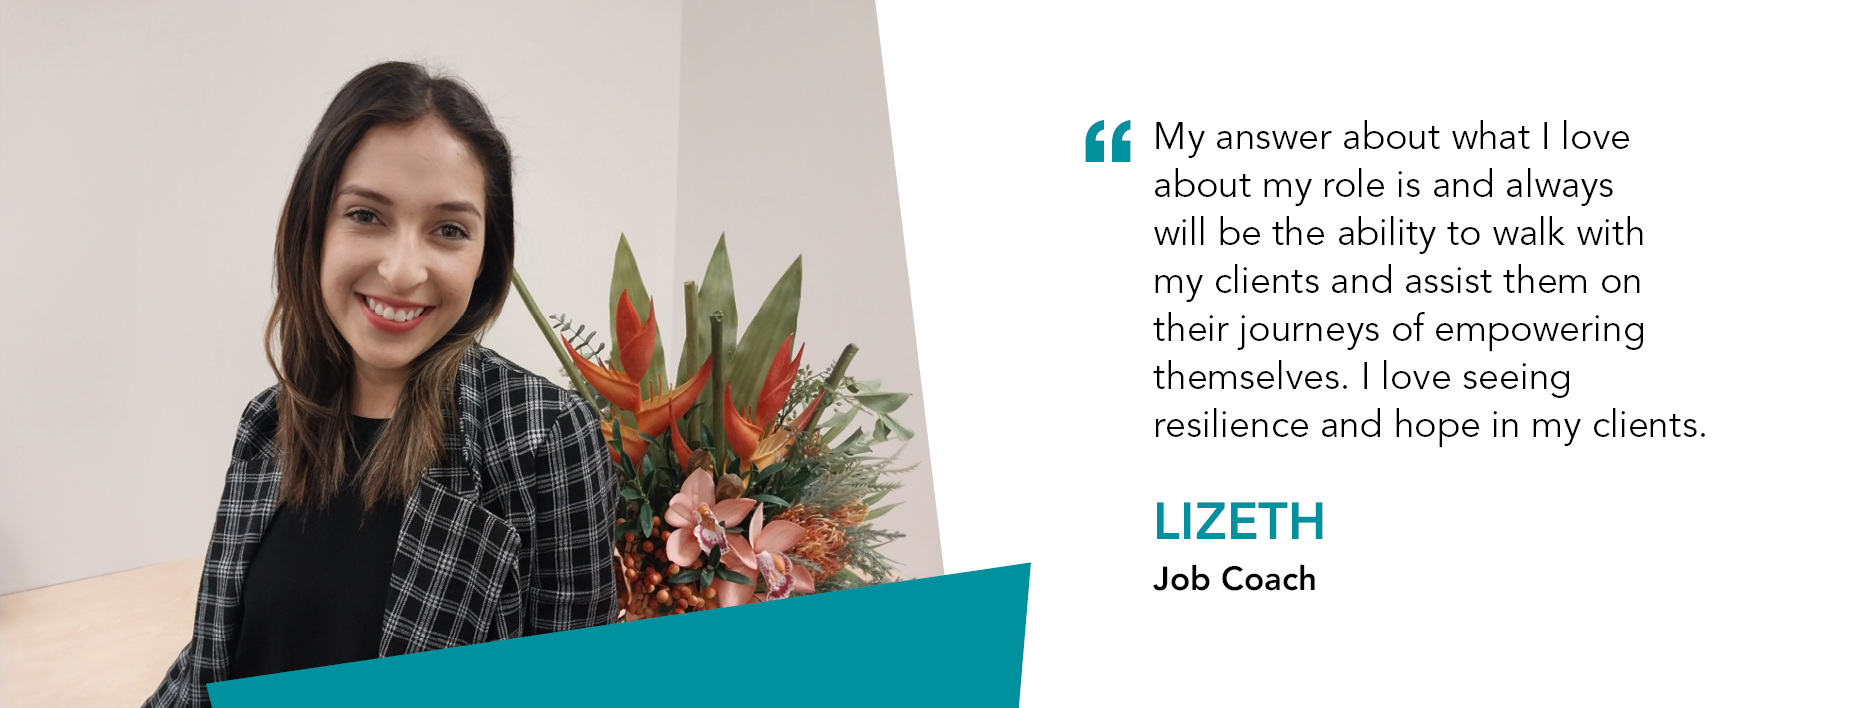 Lizeth smiles in front of a bunch of flowers. Quote reads "My answer about what I love about my role is and always will be the ability to walk with my clients and assist them on their journeys of empowering themselves. I love seeing resilience and hope in my clients,” said Lizeth, Job Coach